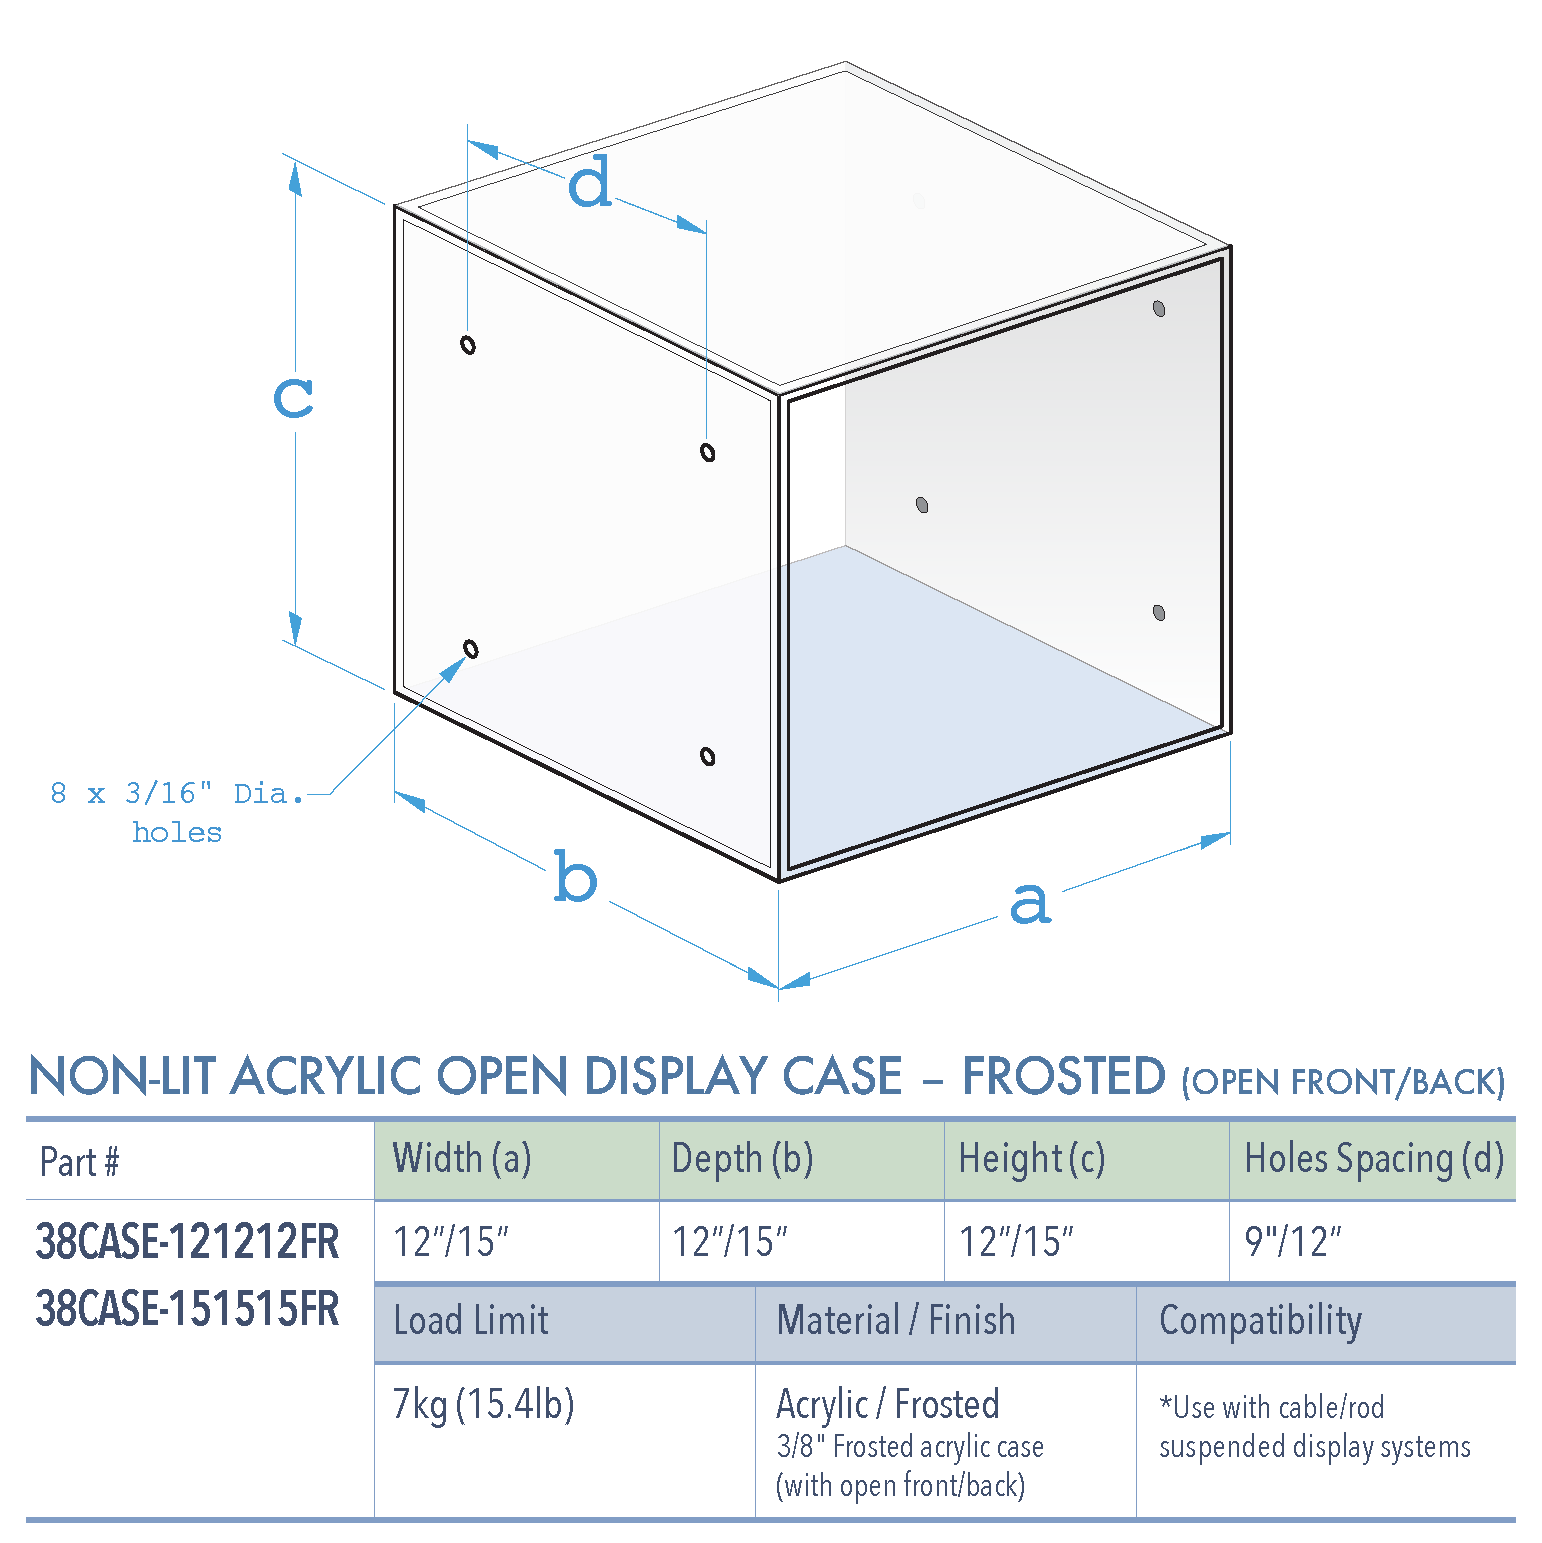 Specifications for 38CASE-FROSTED-OPEN